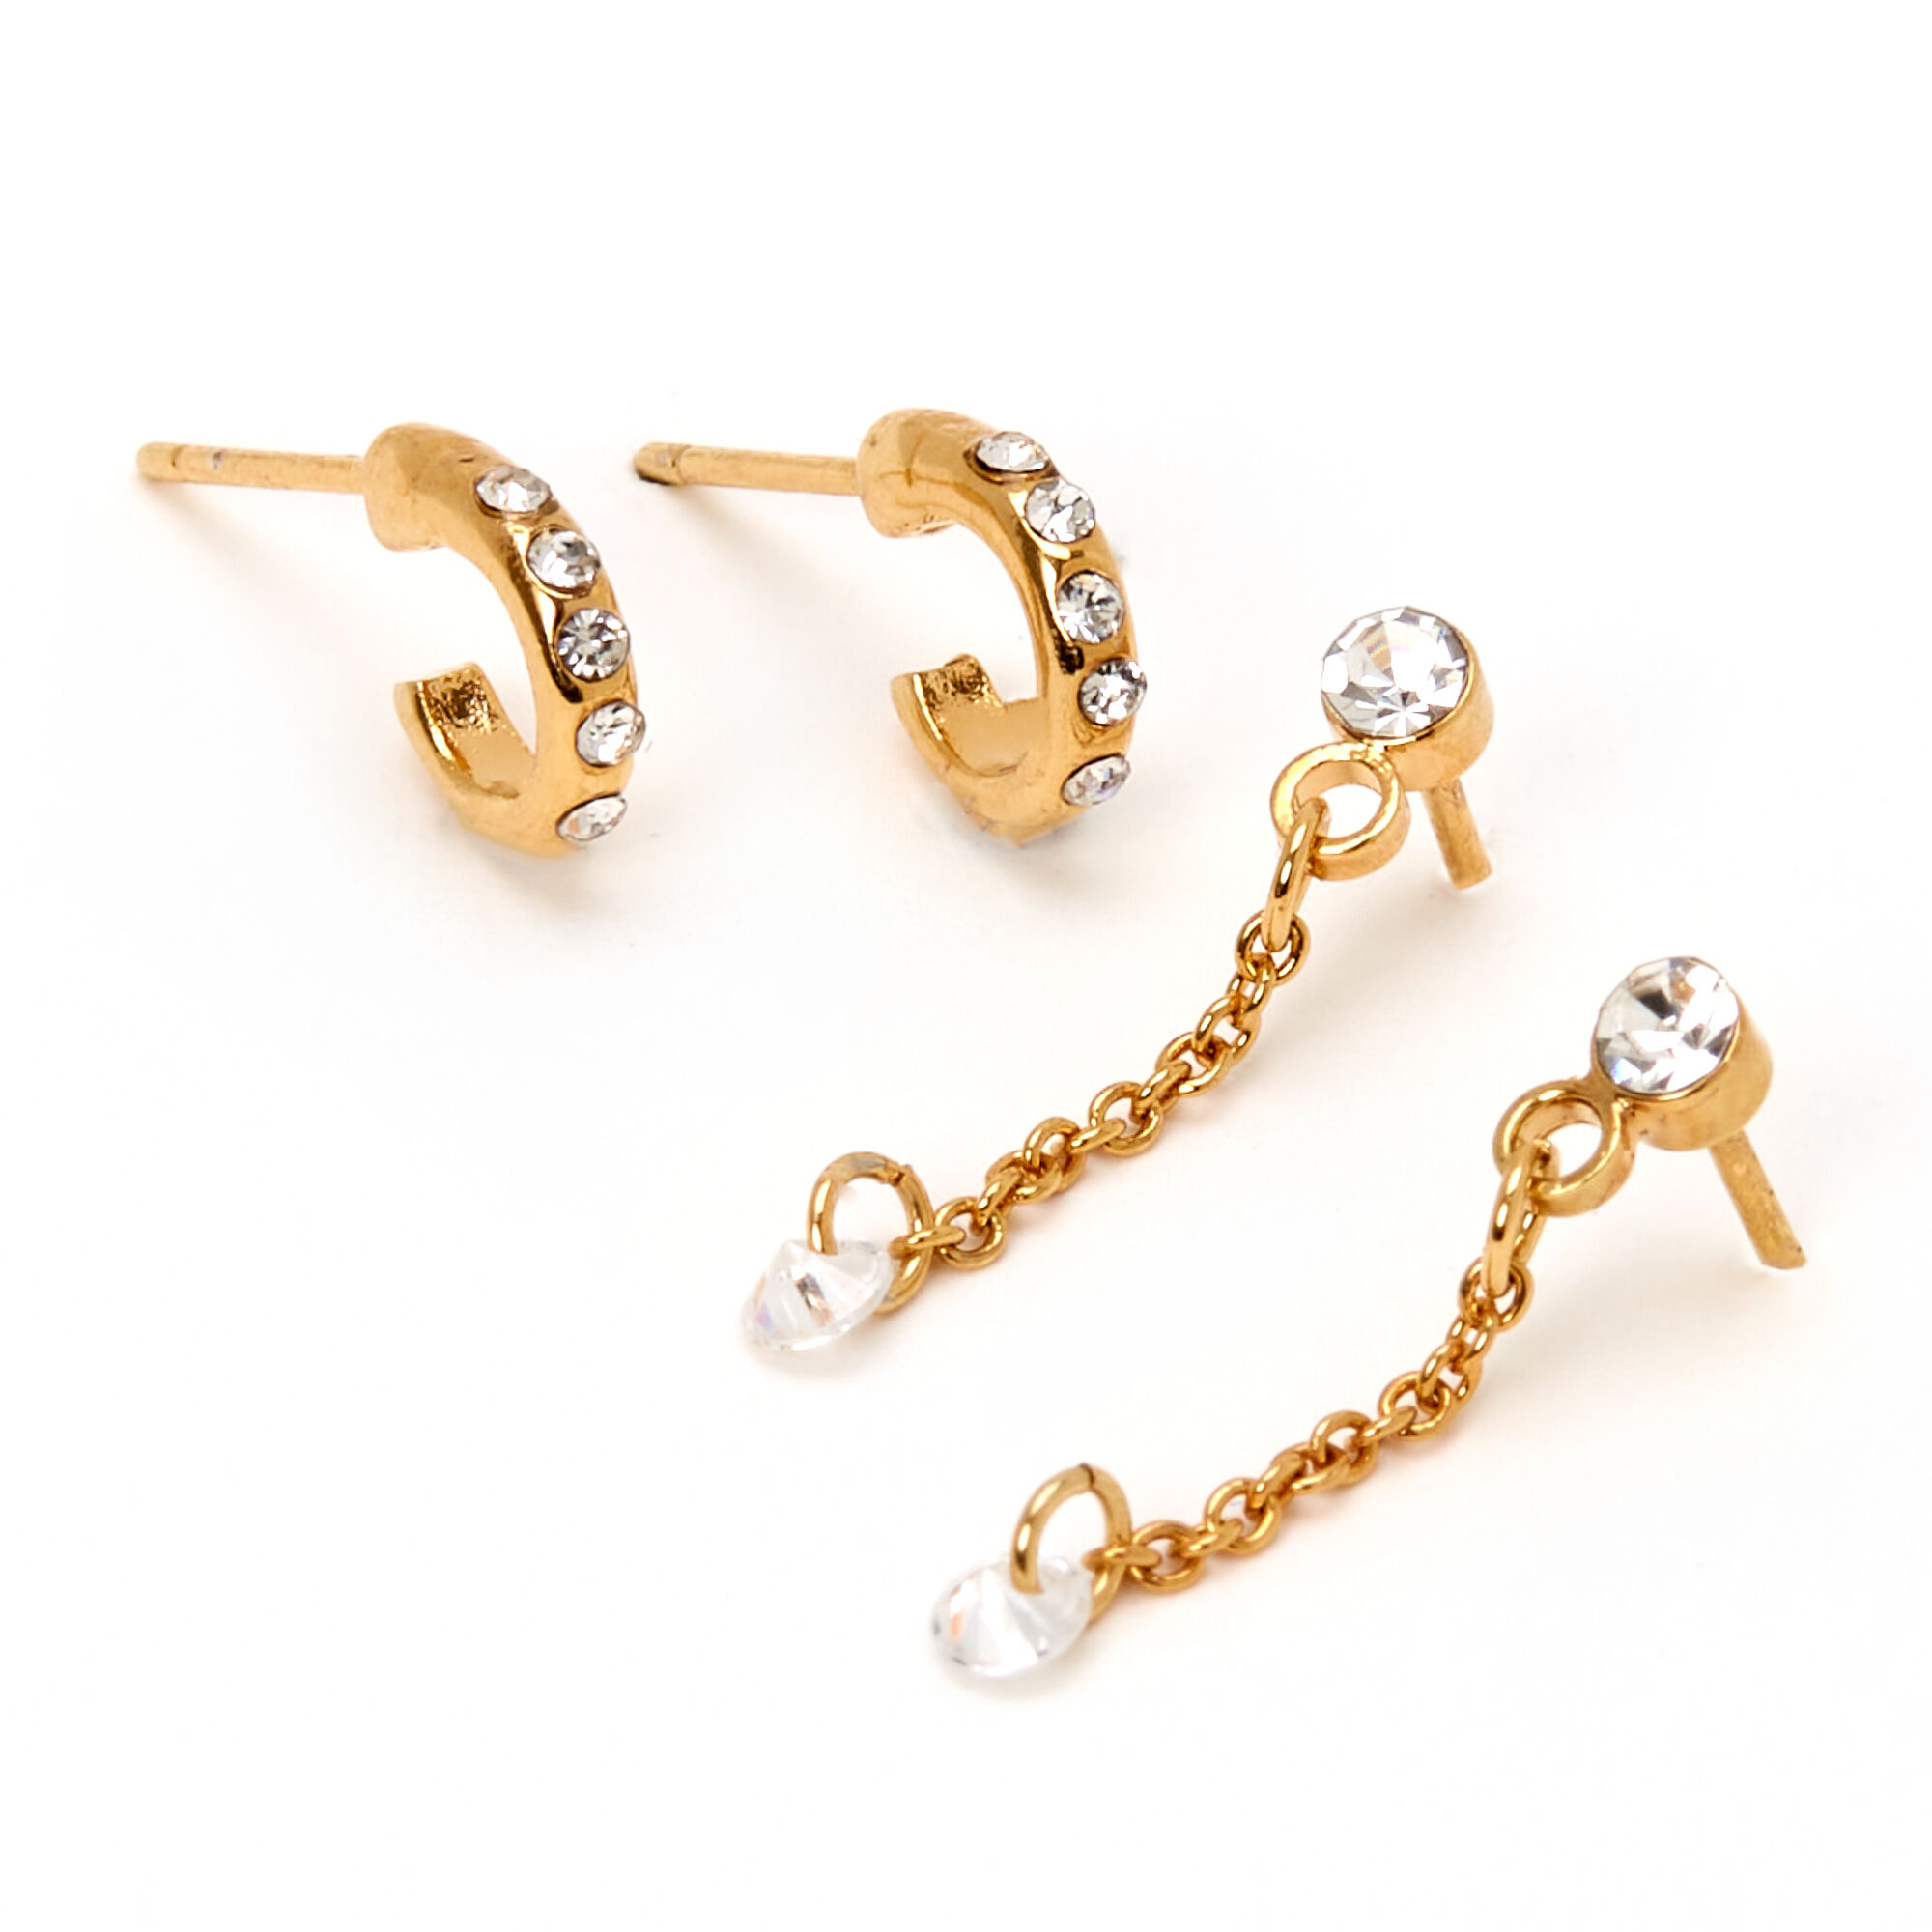 View Claires 18Ct Plated Crystal Chain Hoop Drop Earrings 2 Pack Gold information